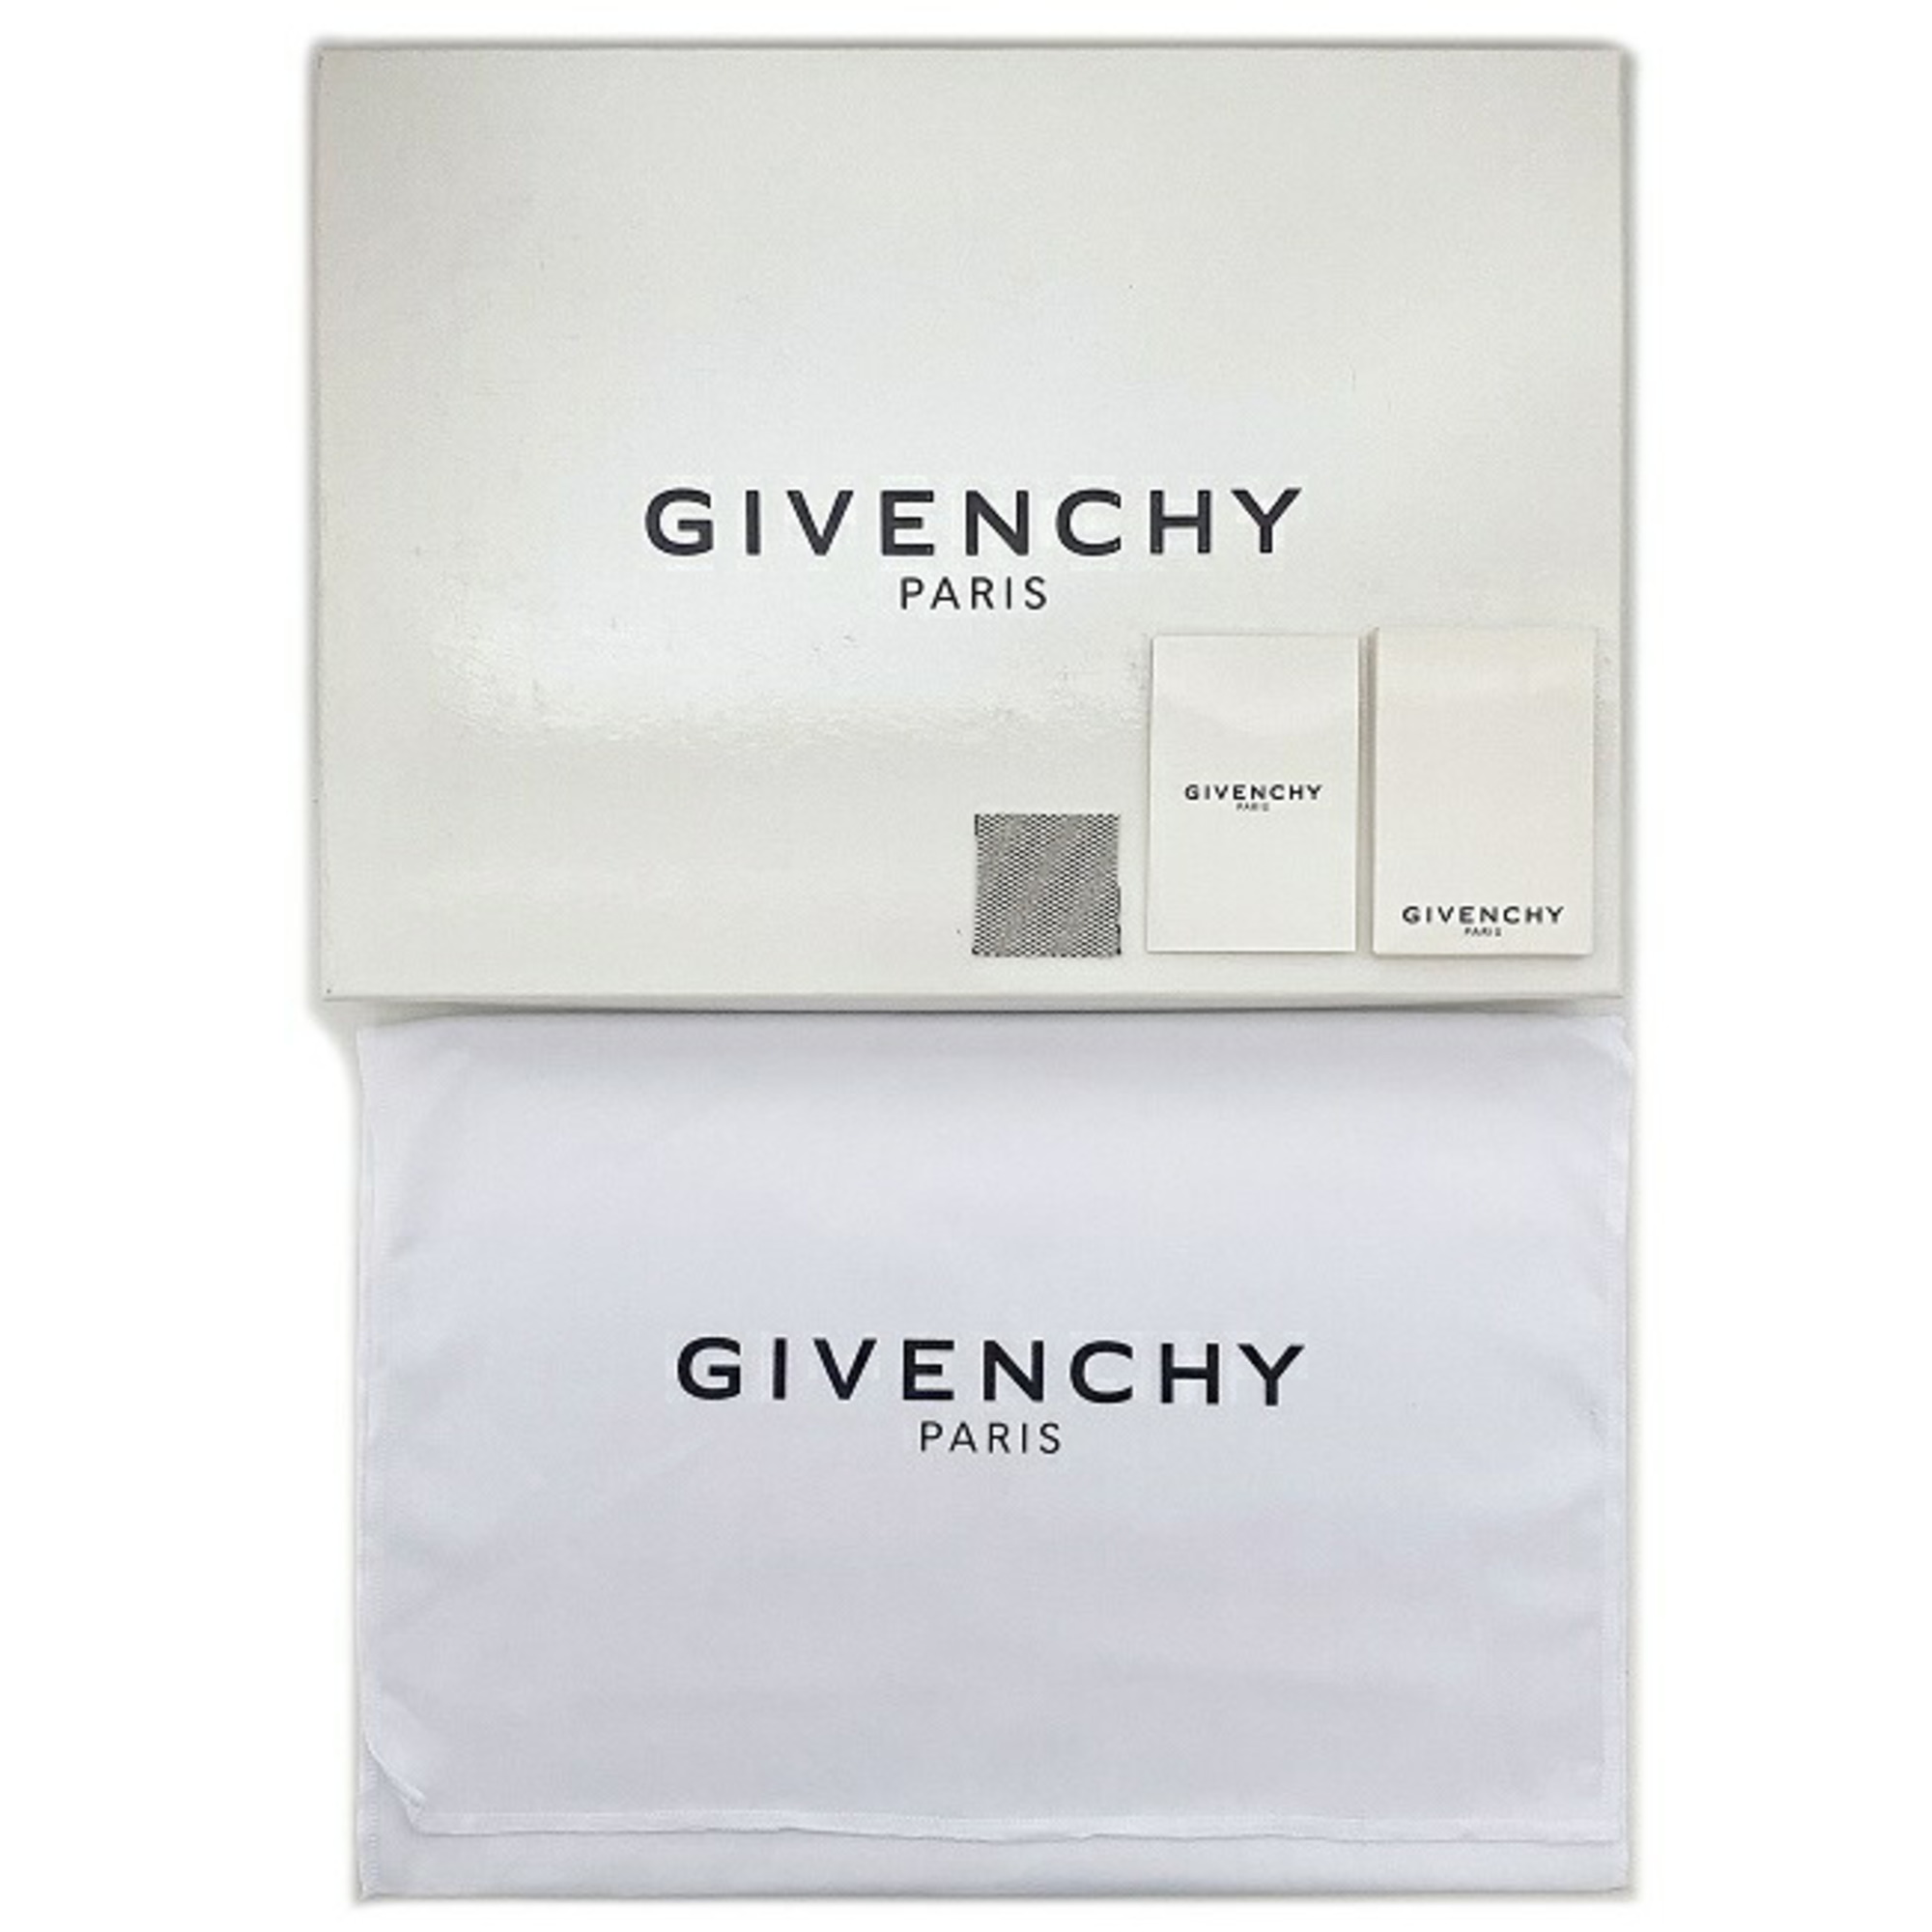 Givenchy clutch bag yellow gray BK604PK0SW 054 leather canvas GIVENCHY pouch men's